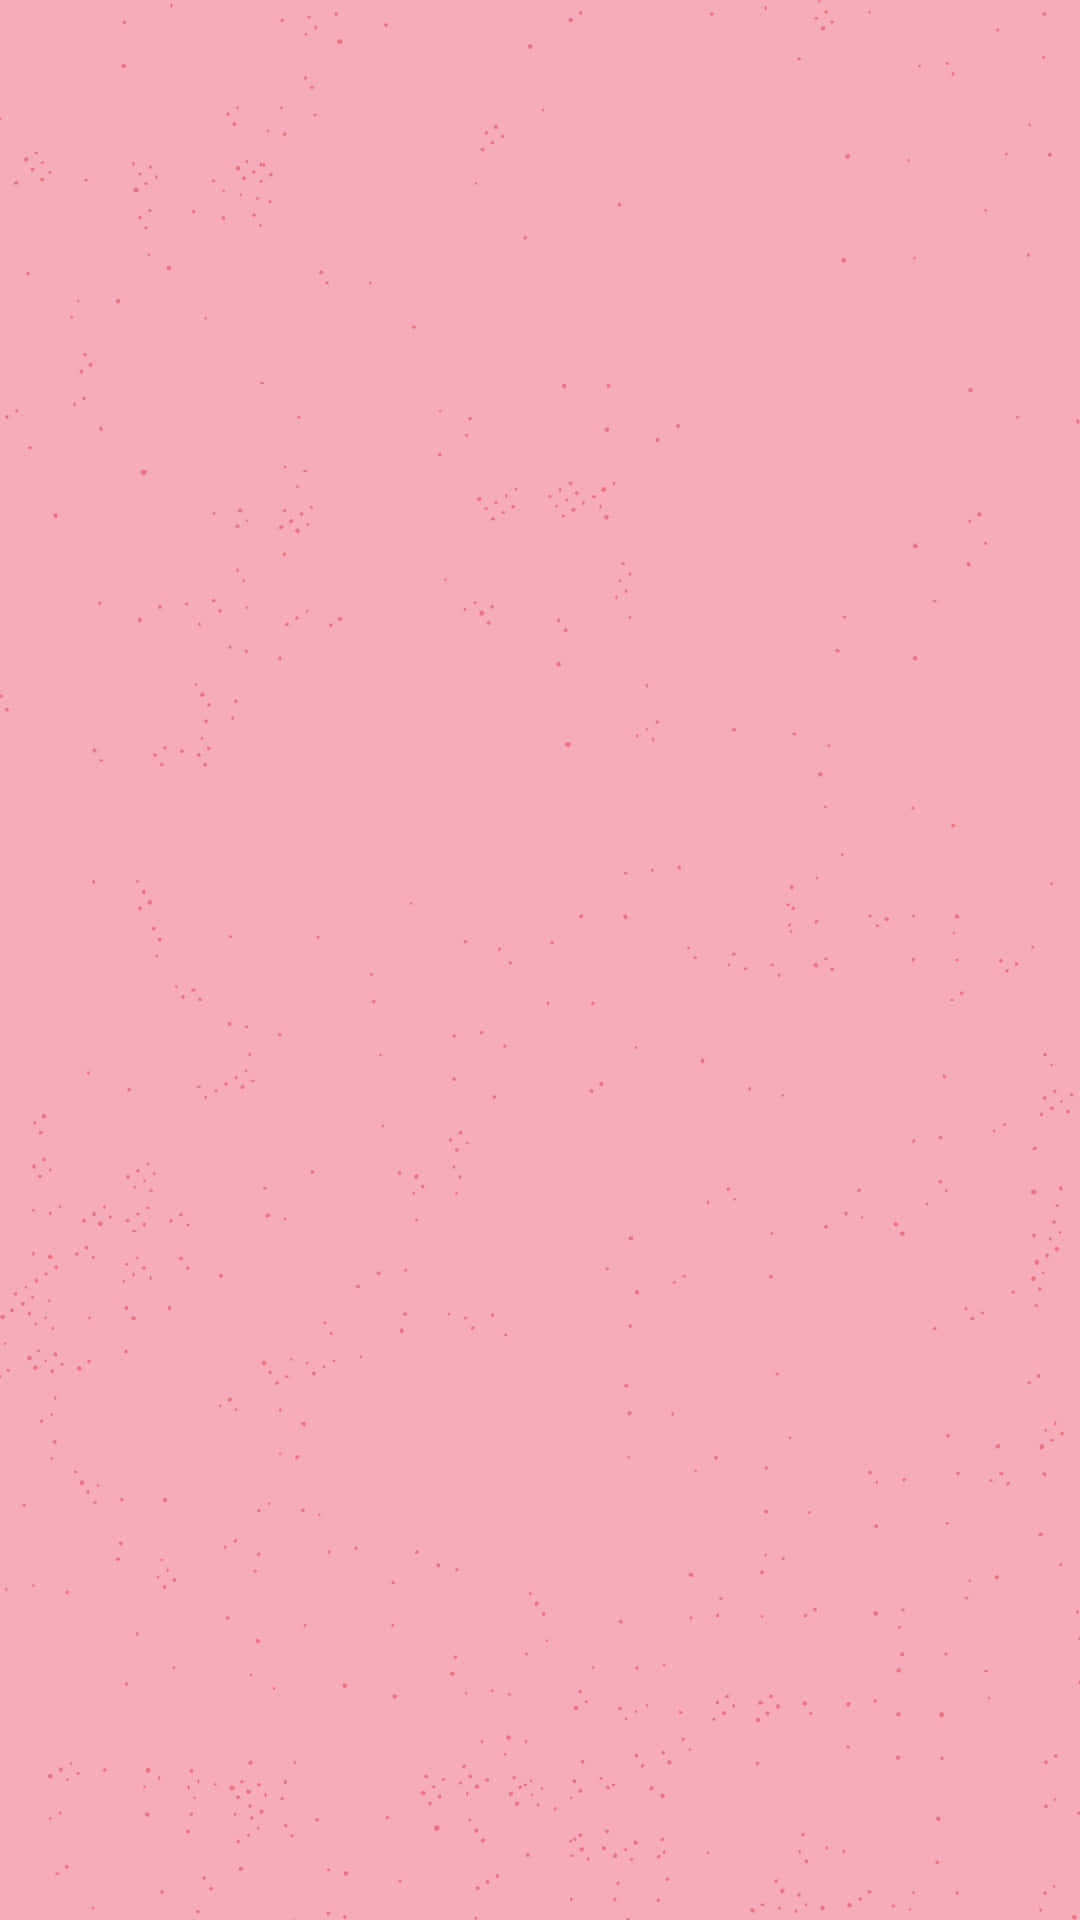 Vibrant Pink Solid Background